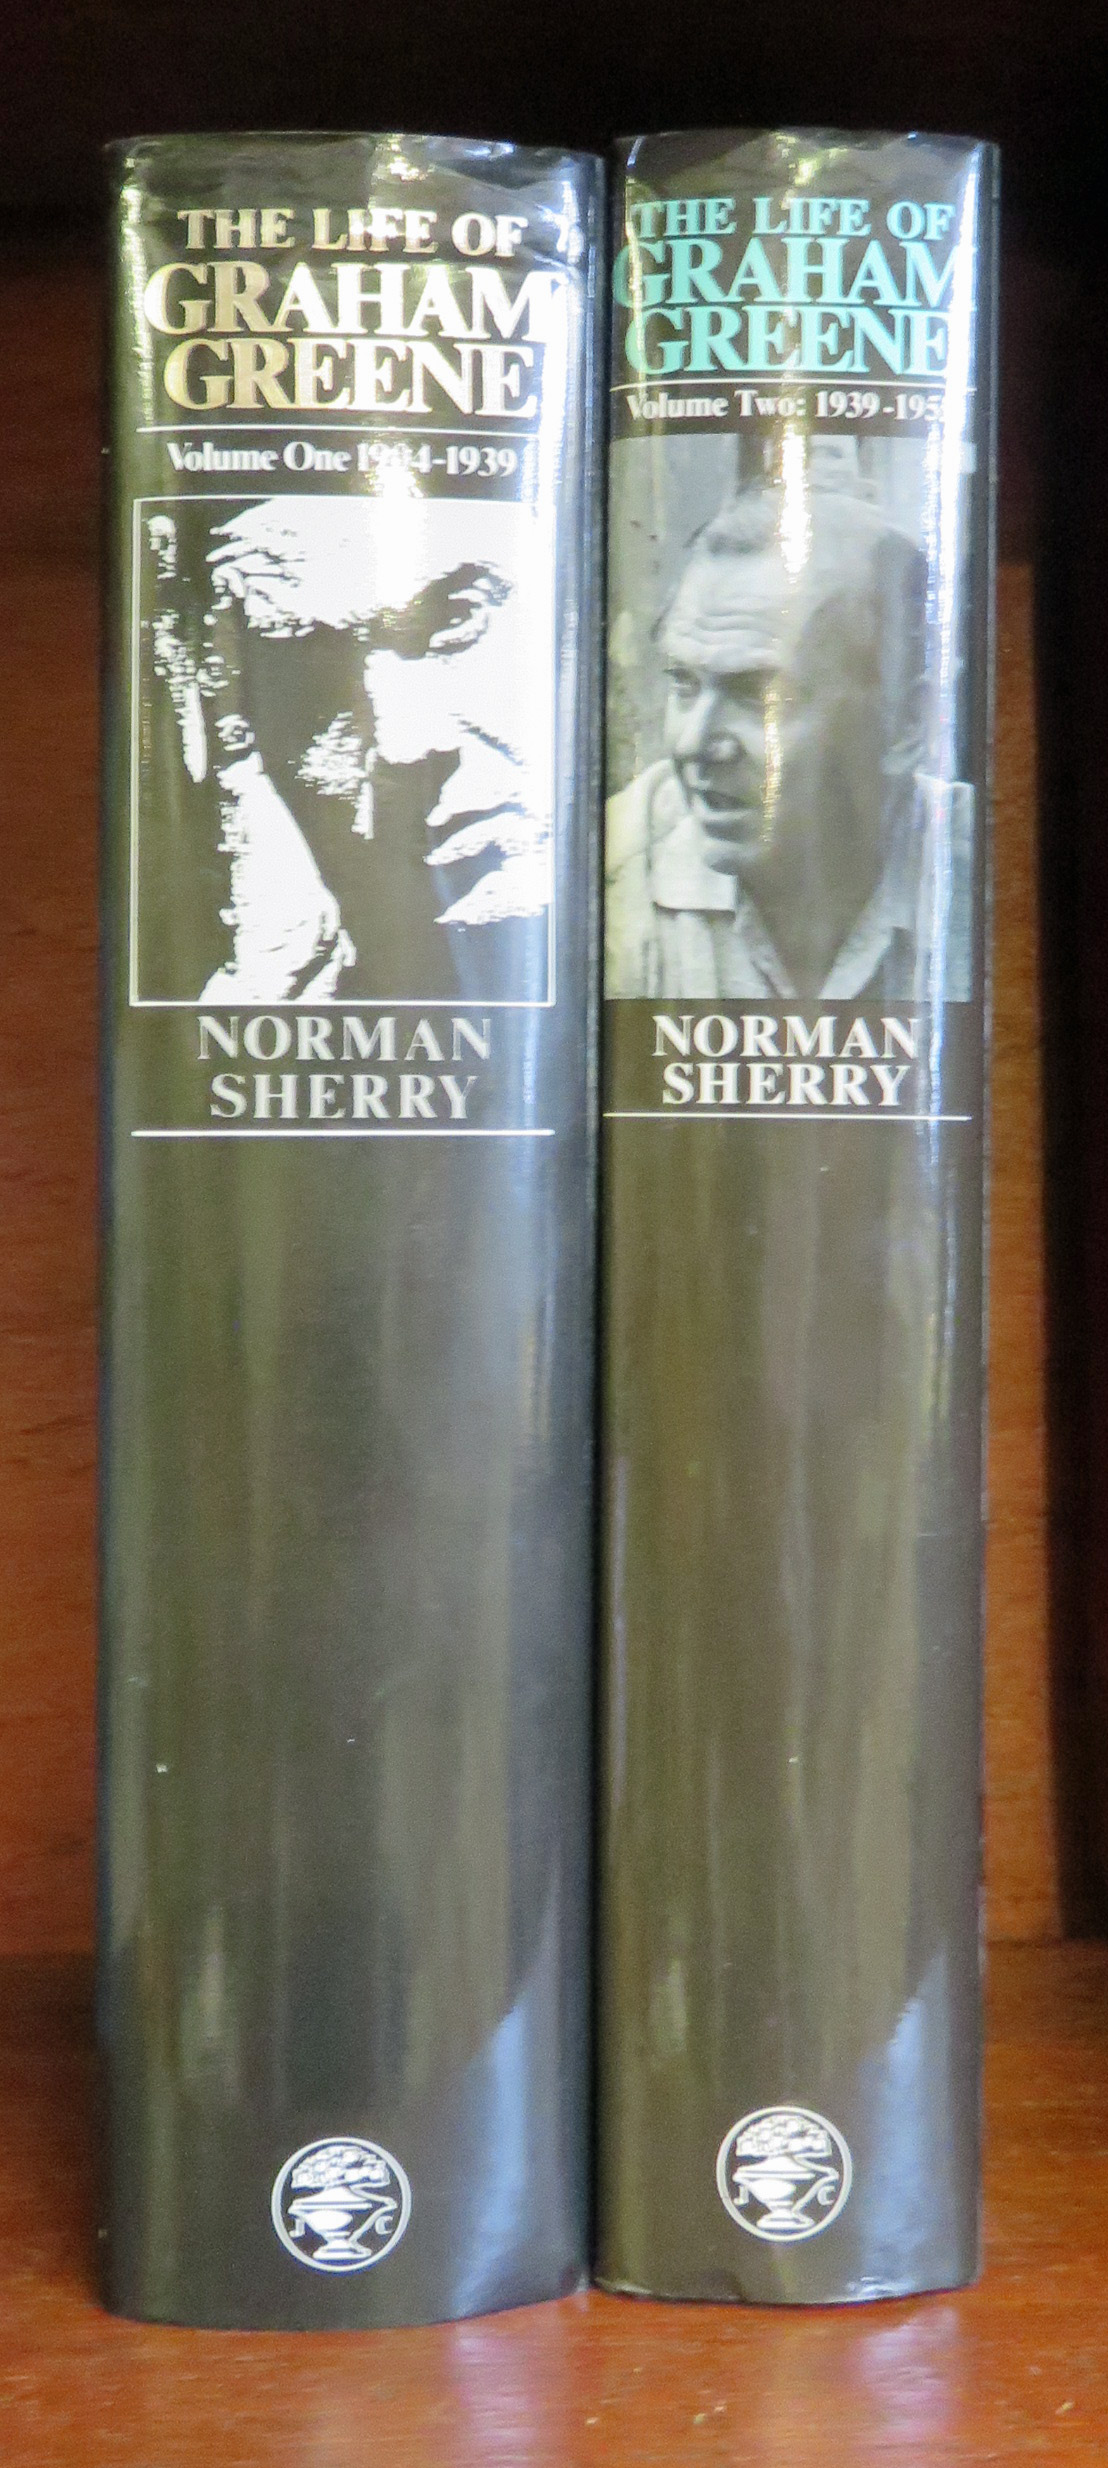 The Life of Graham Greene Volume One 1904-1939 and Volume Two 1939-1955